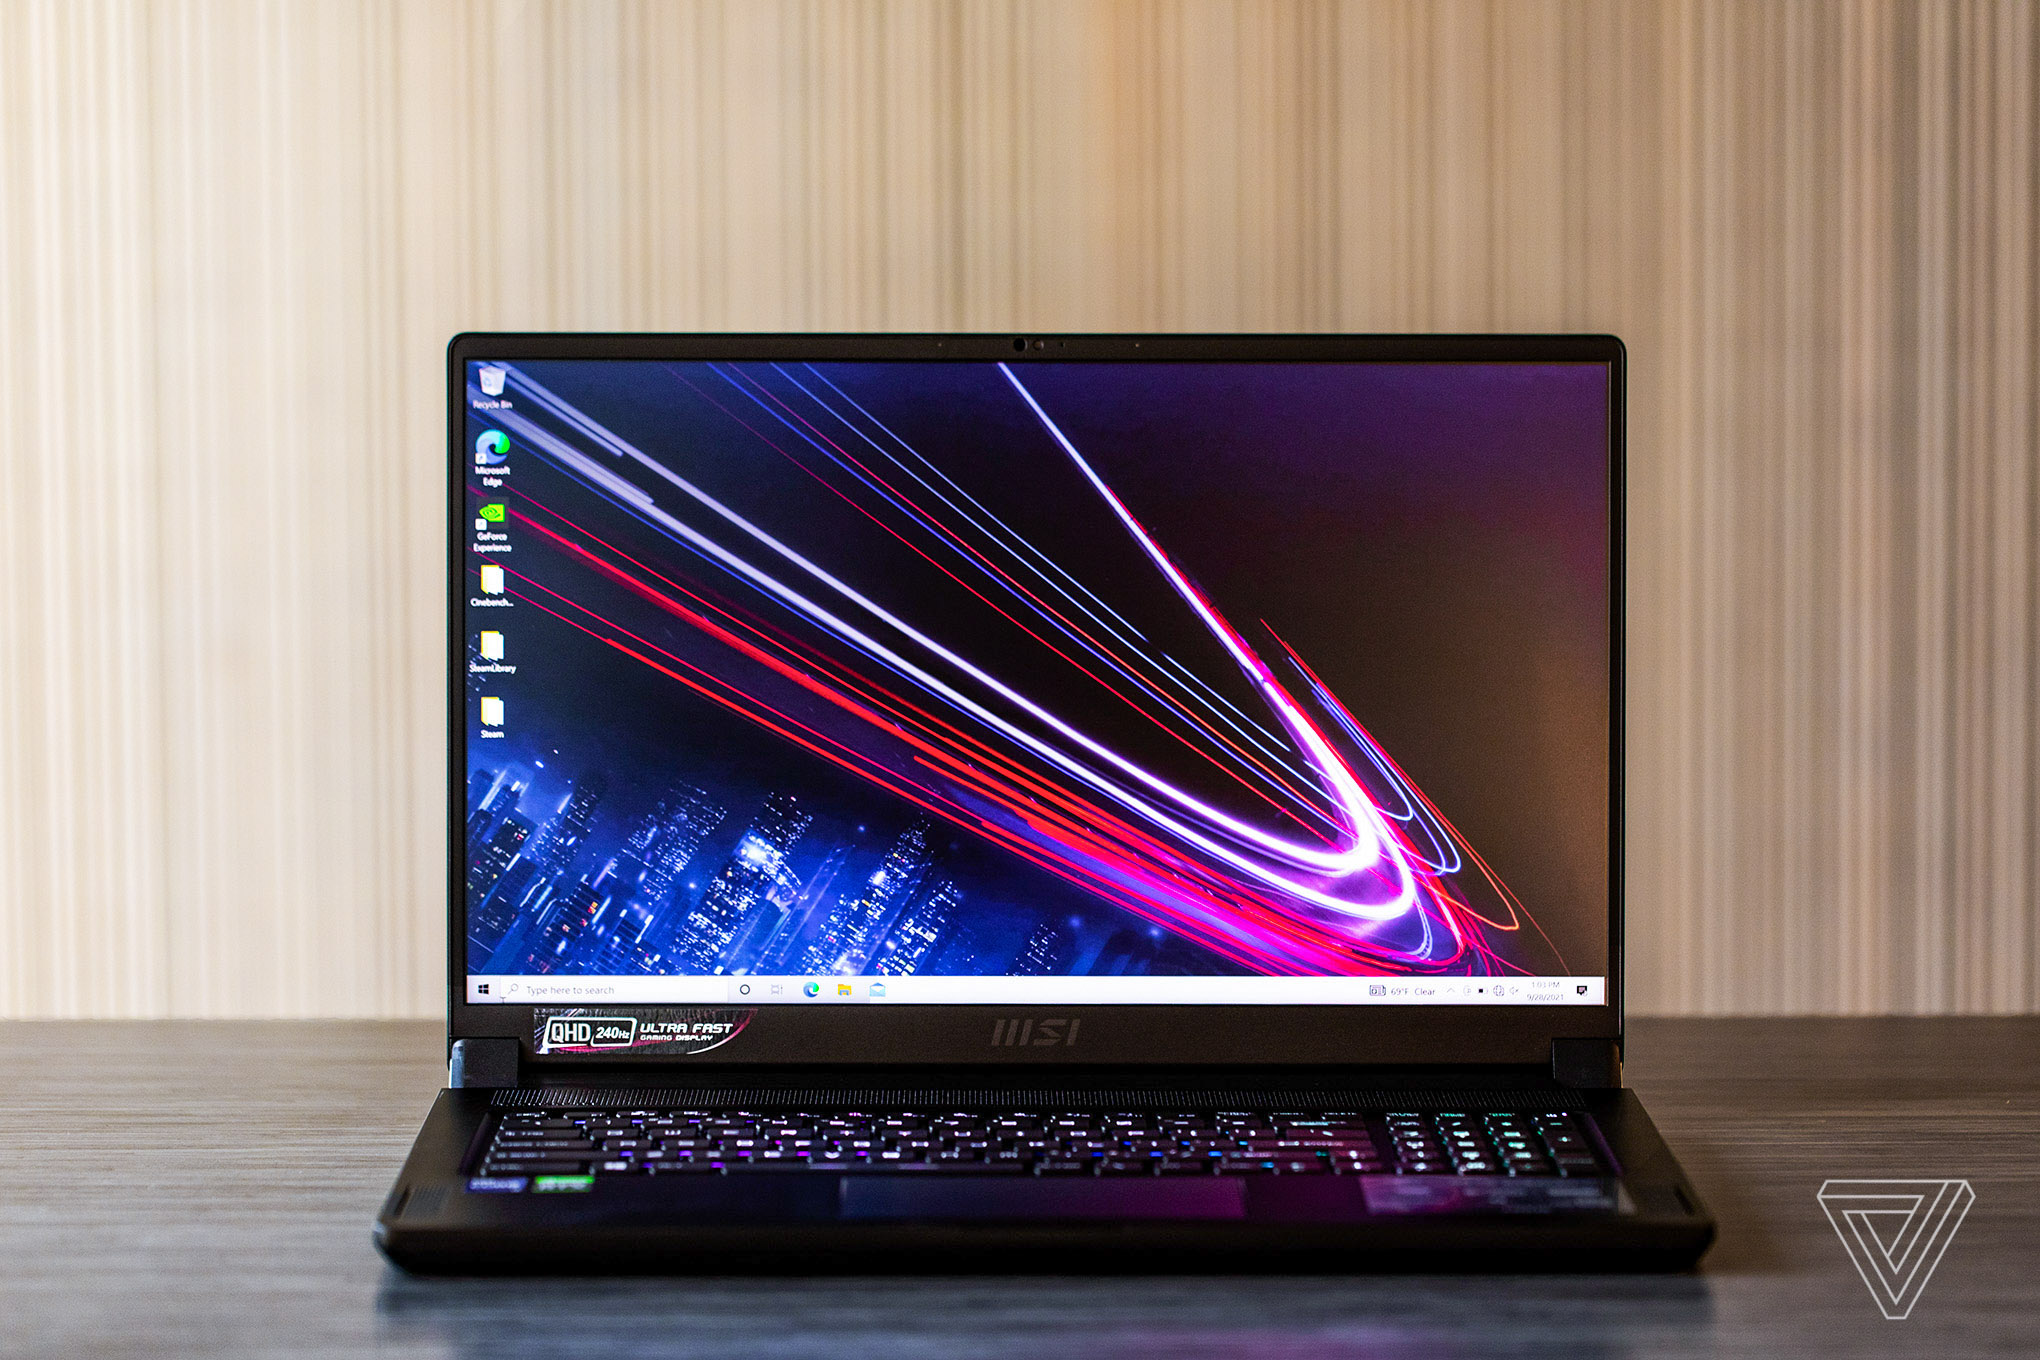 The MSI GS76 Stealth on a table, open. The screen displays a blue and dark red background.